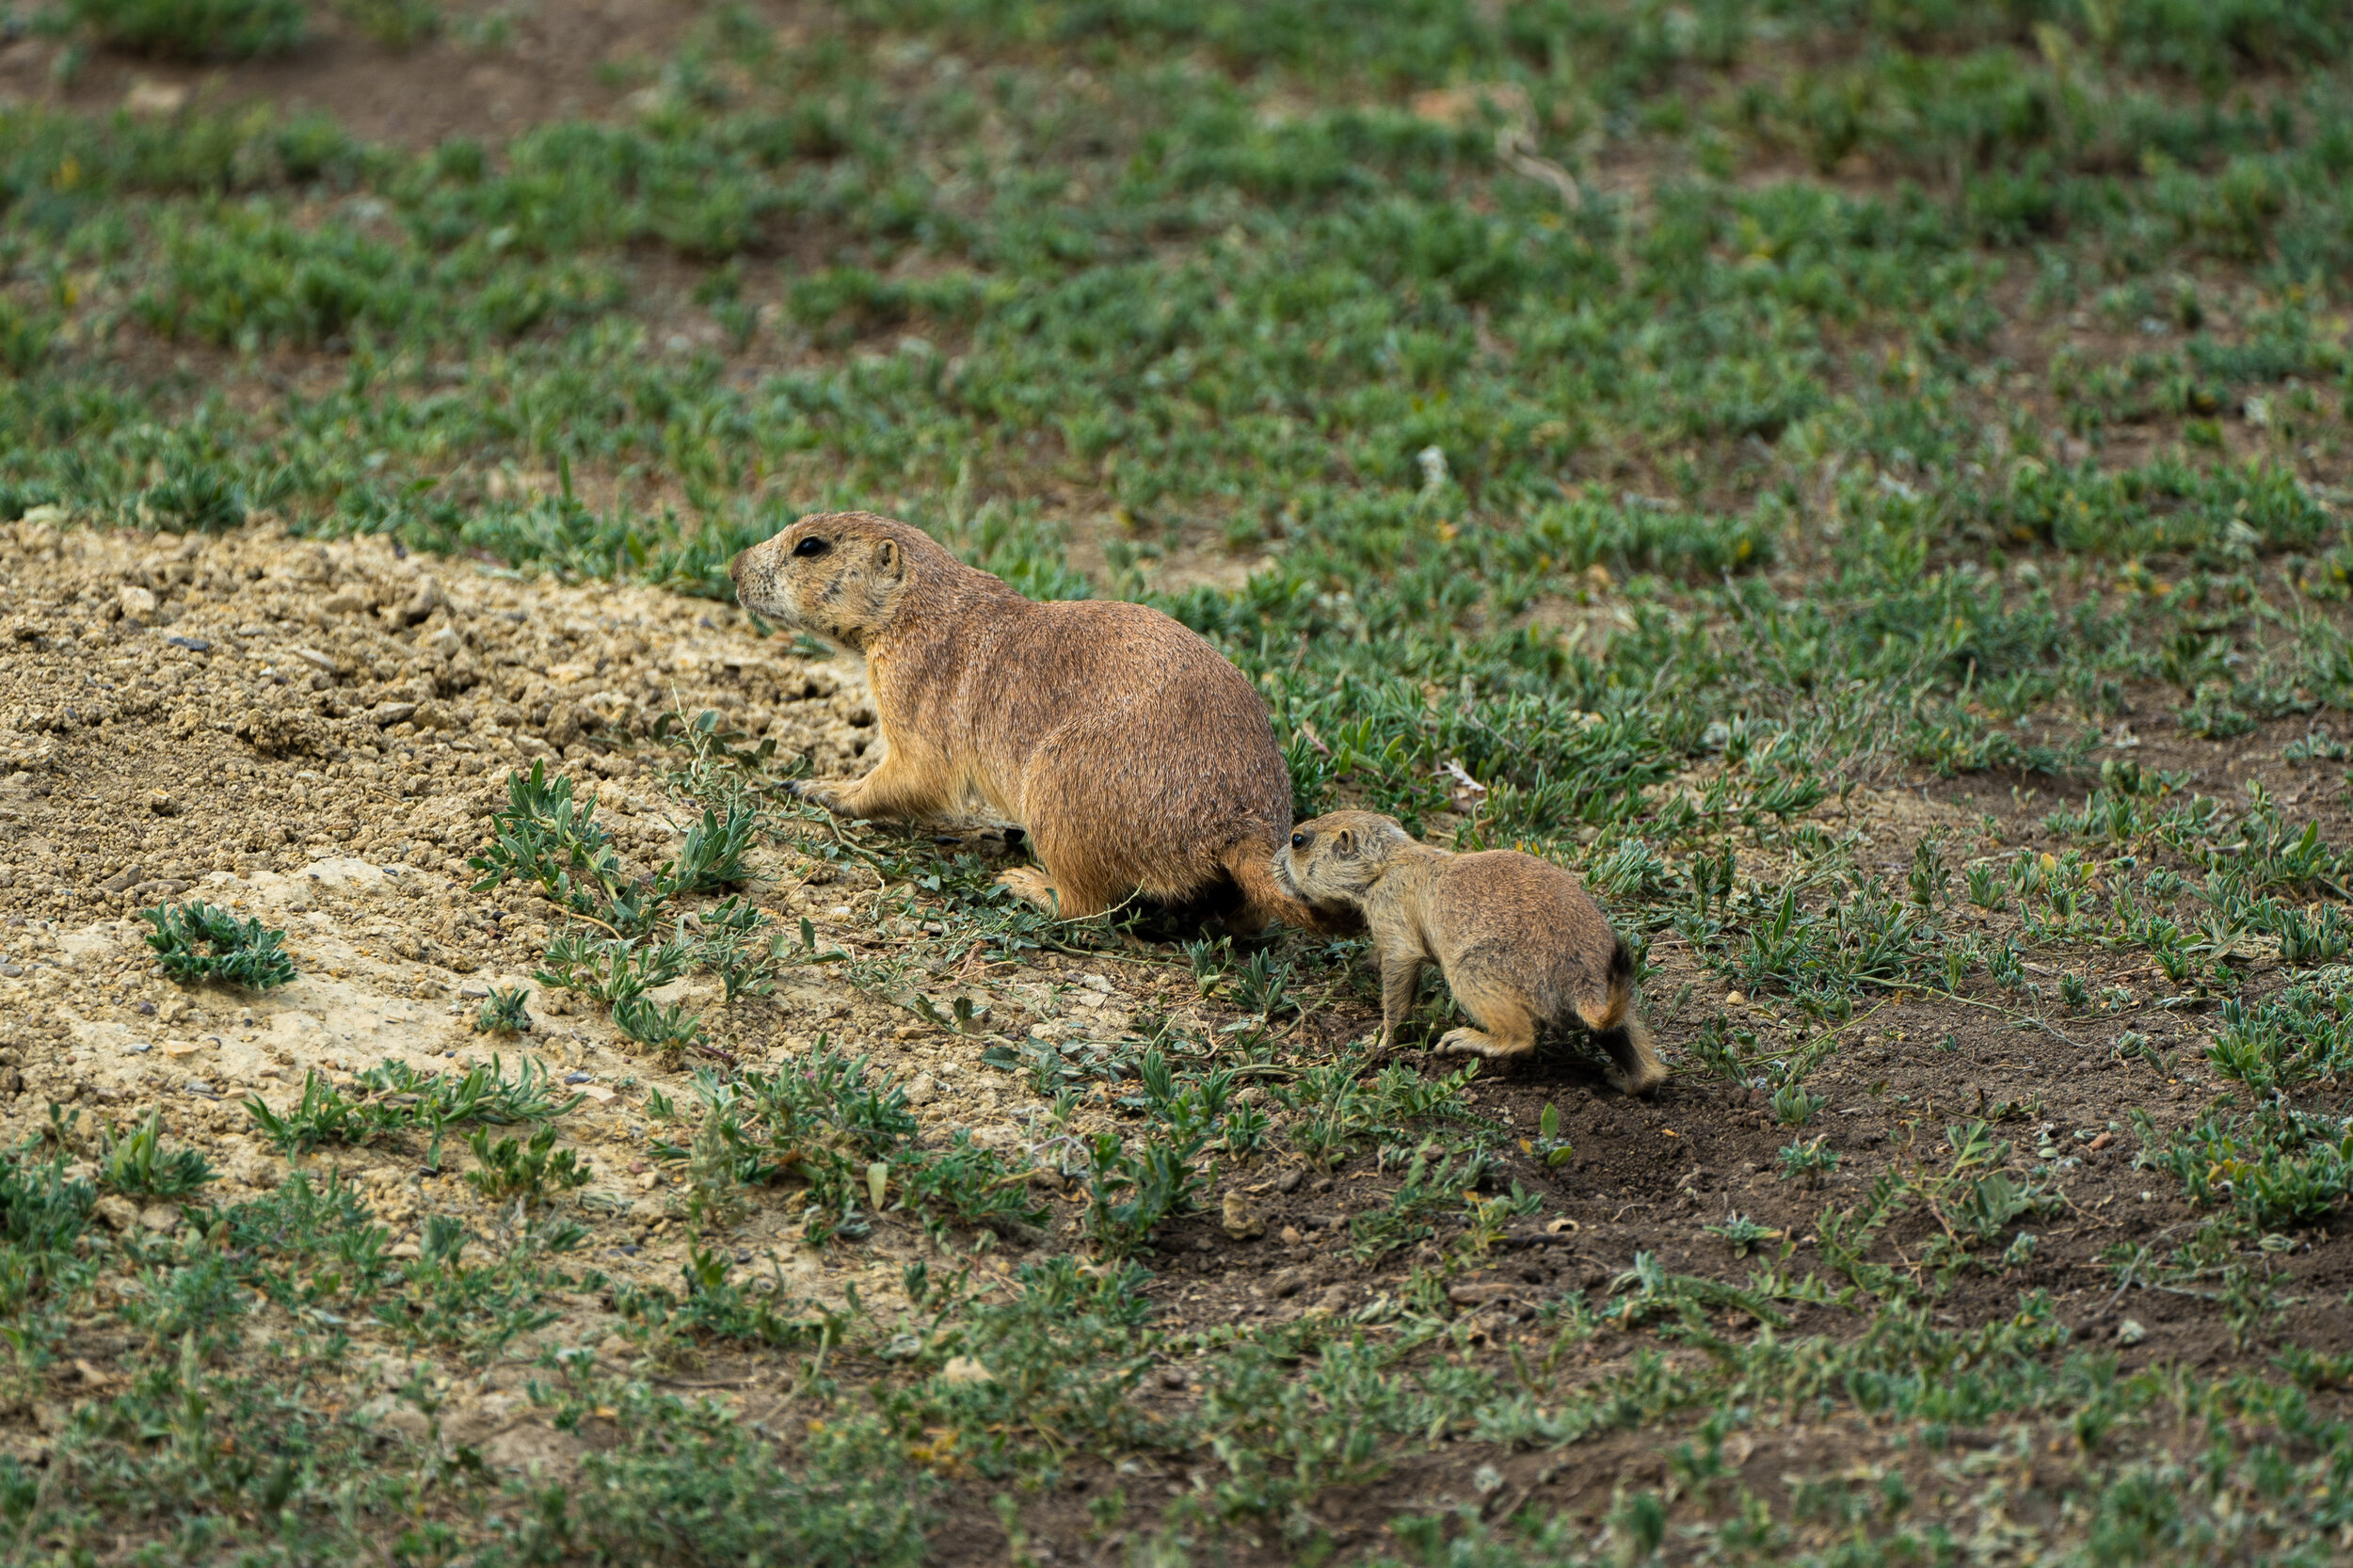  This sweet baby prarie dog didn’t let much space get between him and his mother.  